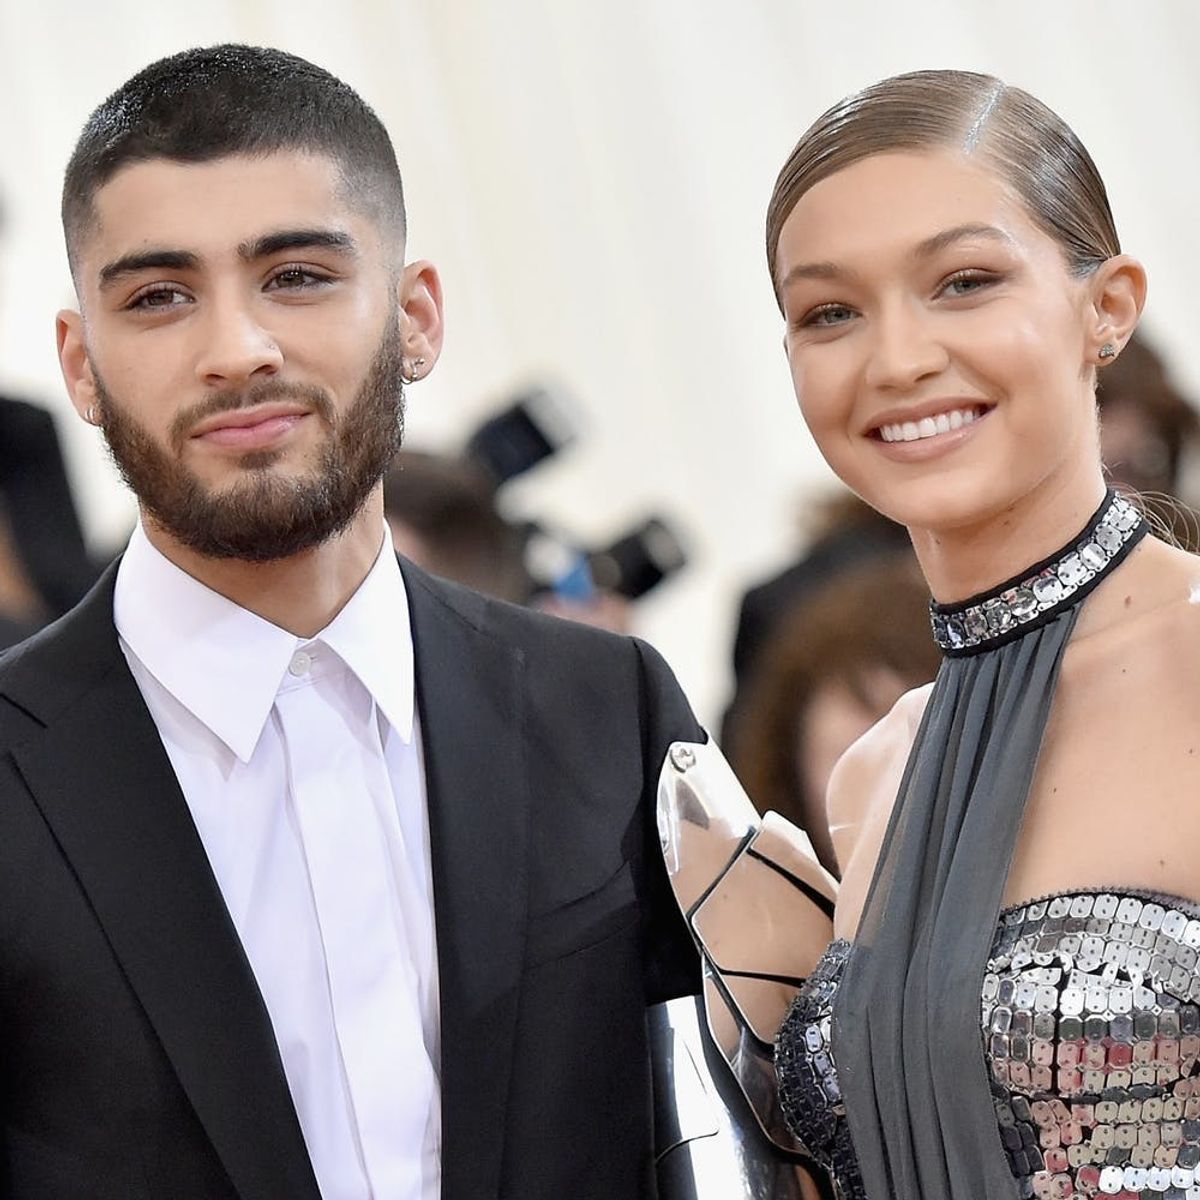 Gigi Hadid and Zayn Malik Announce Amicable Split After 2 Years Together